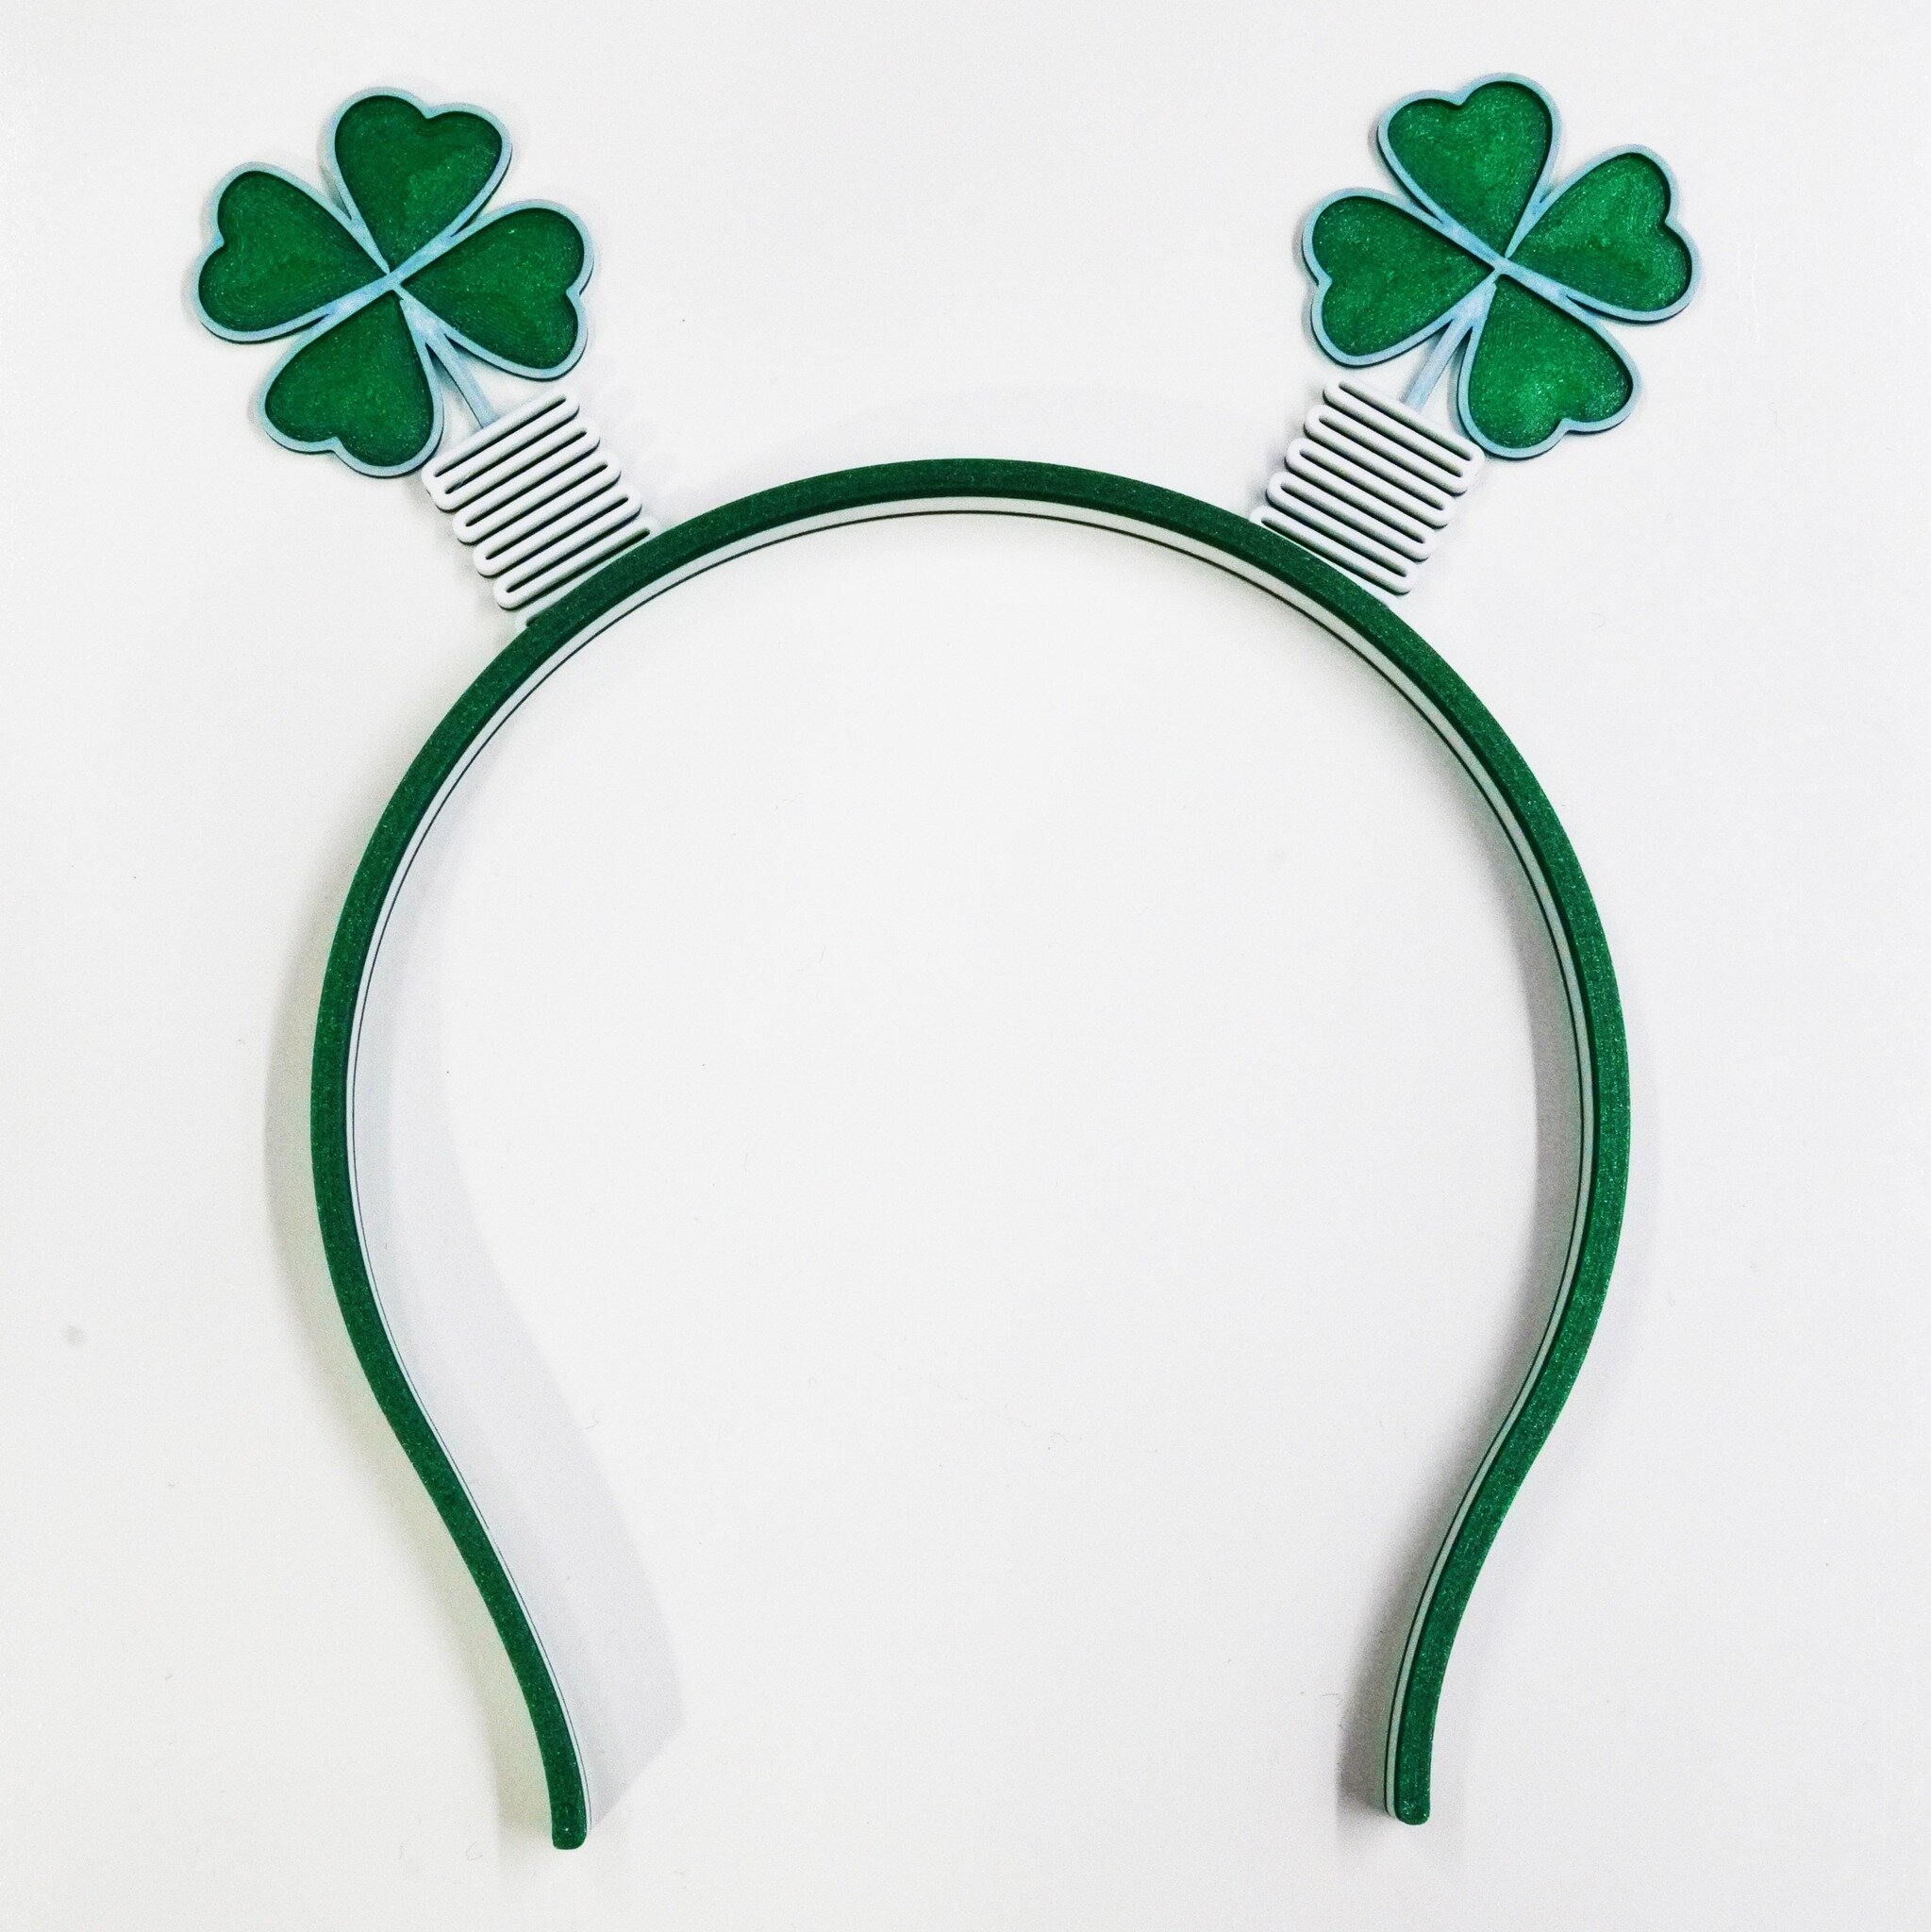 Get lucky with these shamrock headband boppers.  Just in time for #StPatricksDay and a fast print!  #printinplace boppers print on an X1C in just 45 minutes!  Last minute party favors are a piece of cake!

Get it free on @Thangs3D 

https://than.gs/m